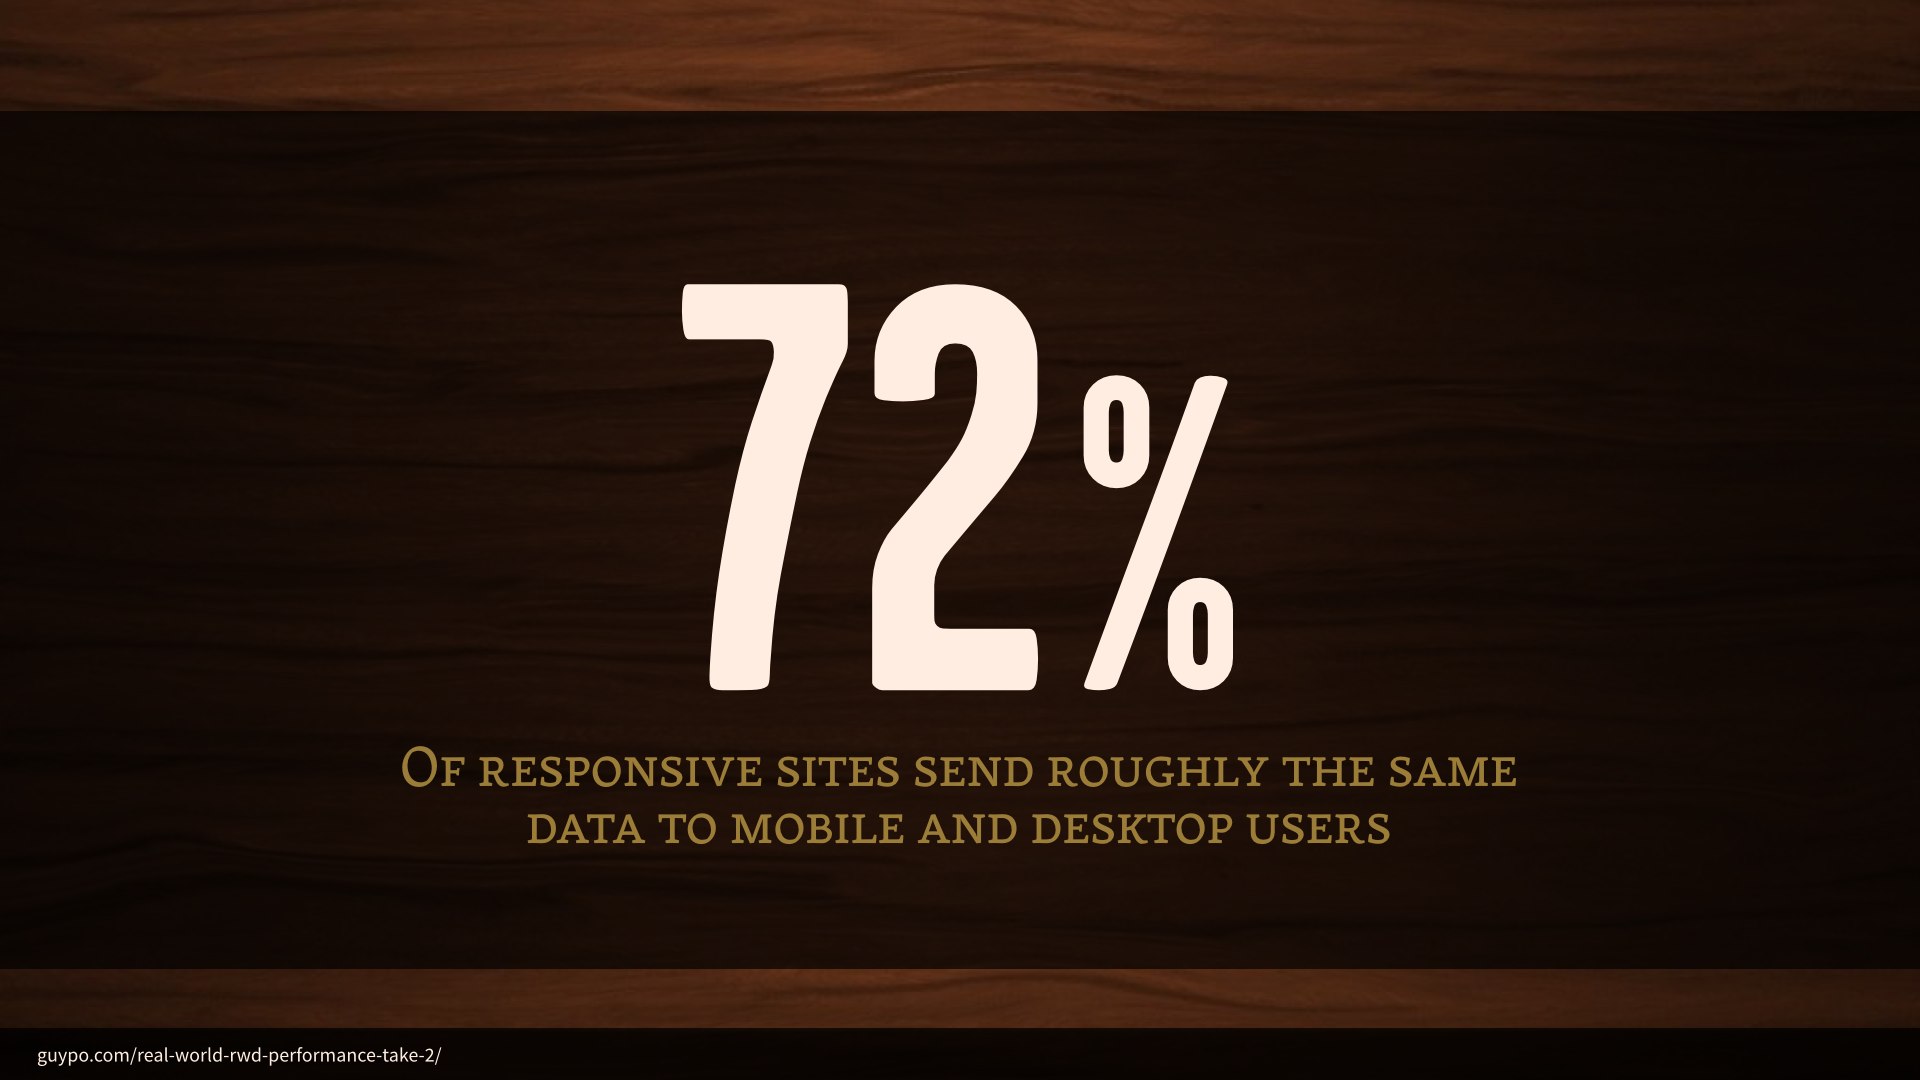 72% of responsive sites send roughly the same data to mobile and desktop users